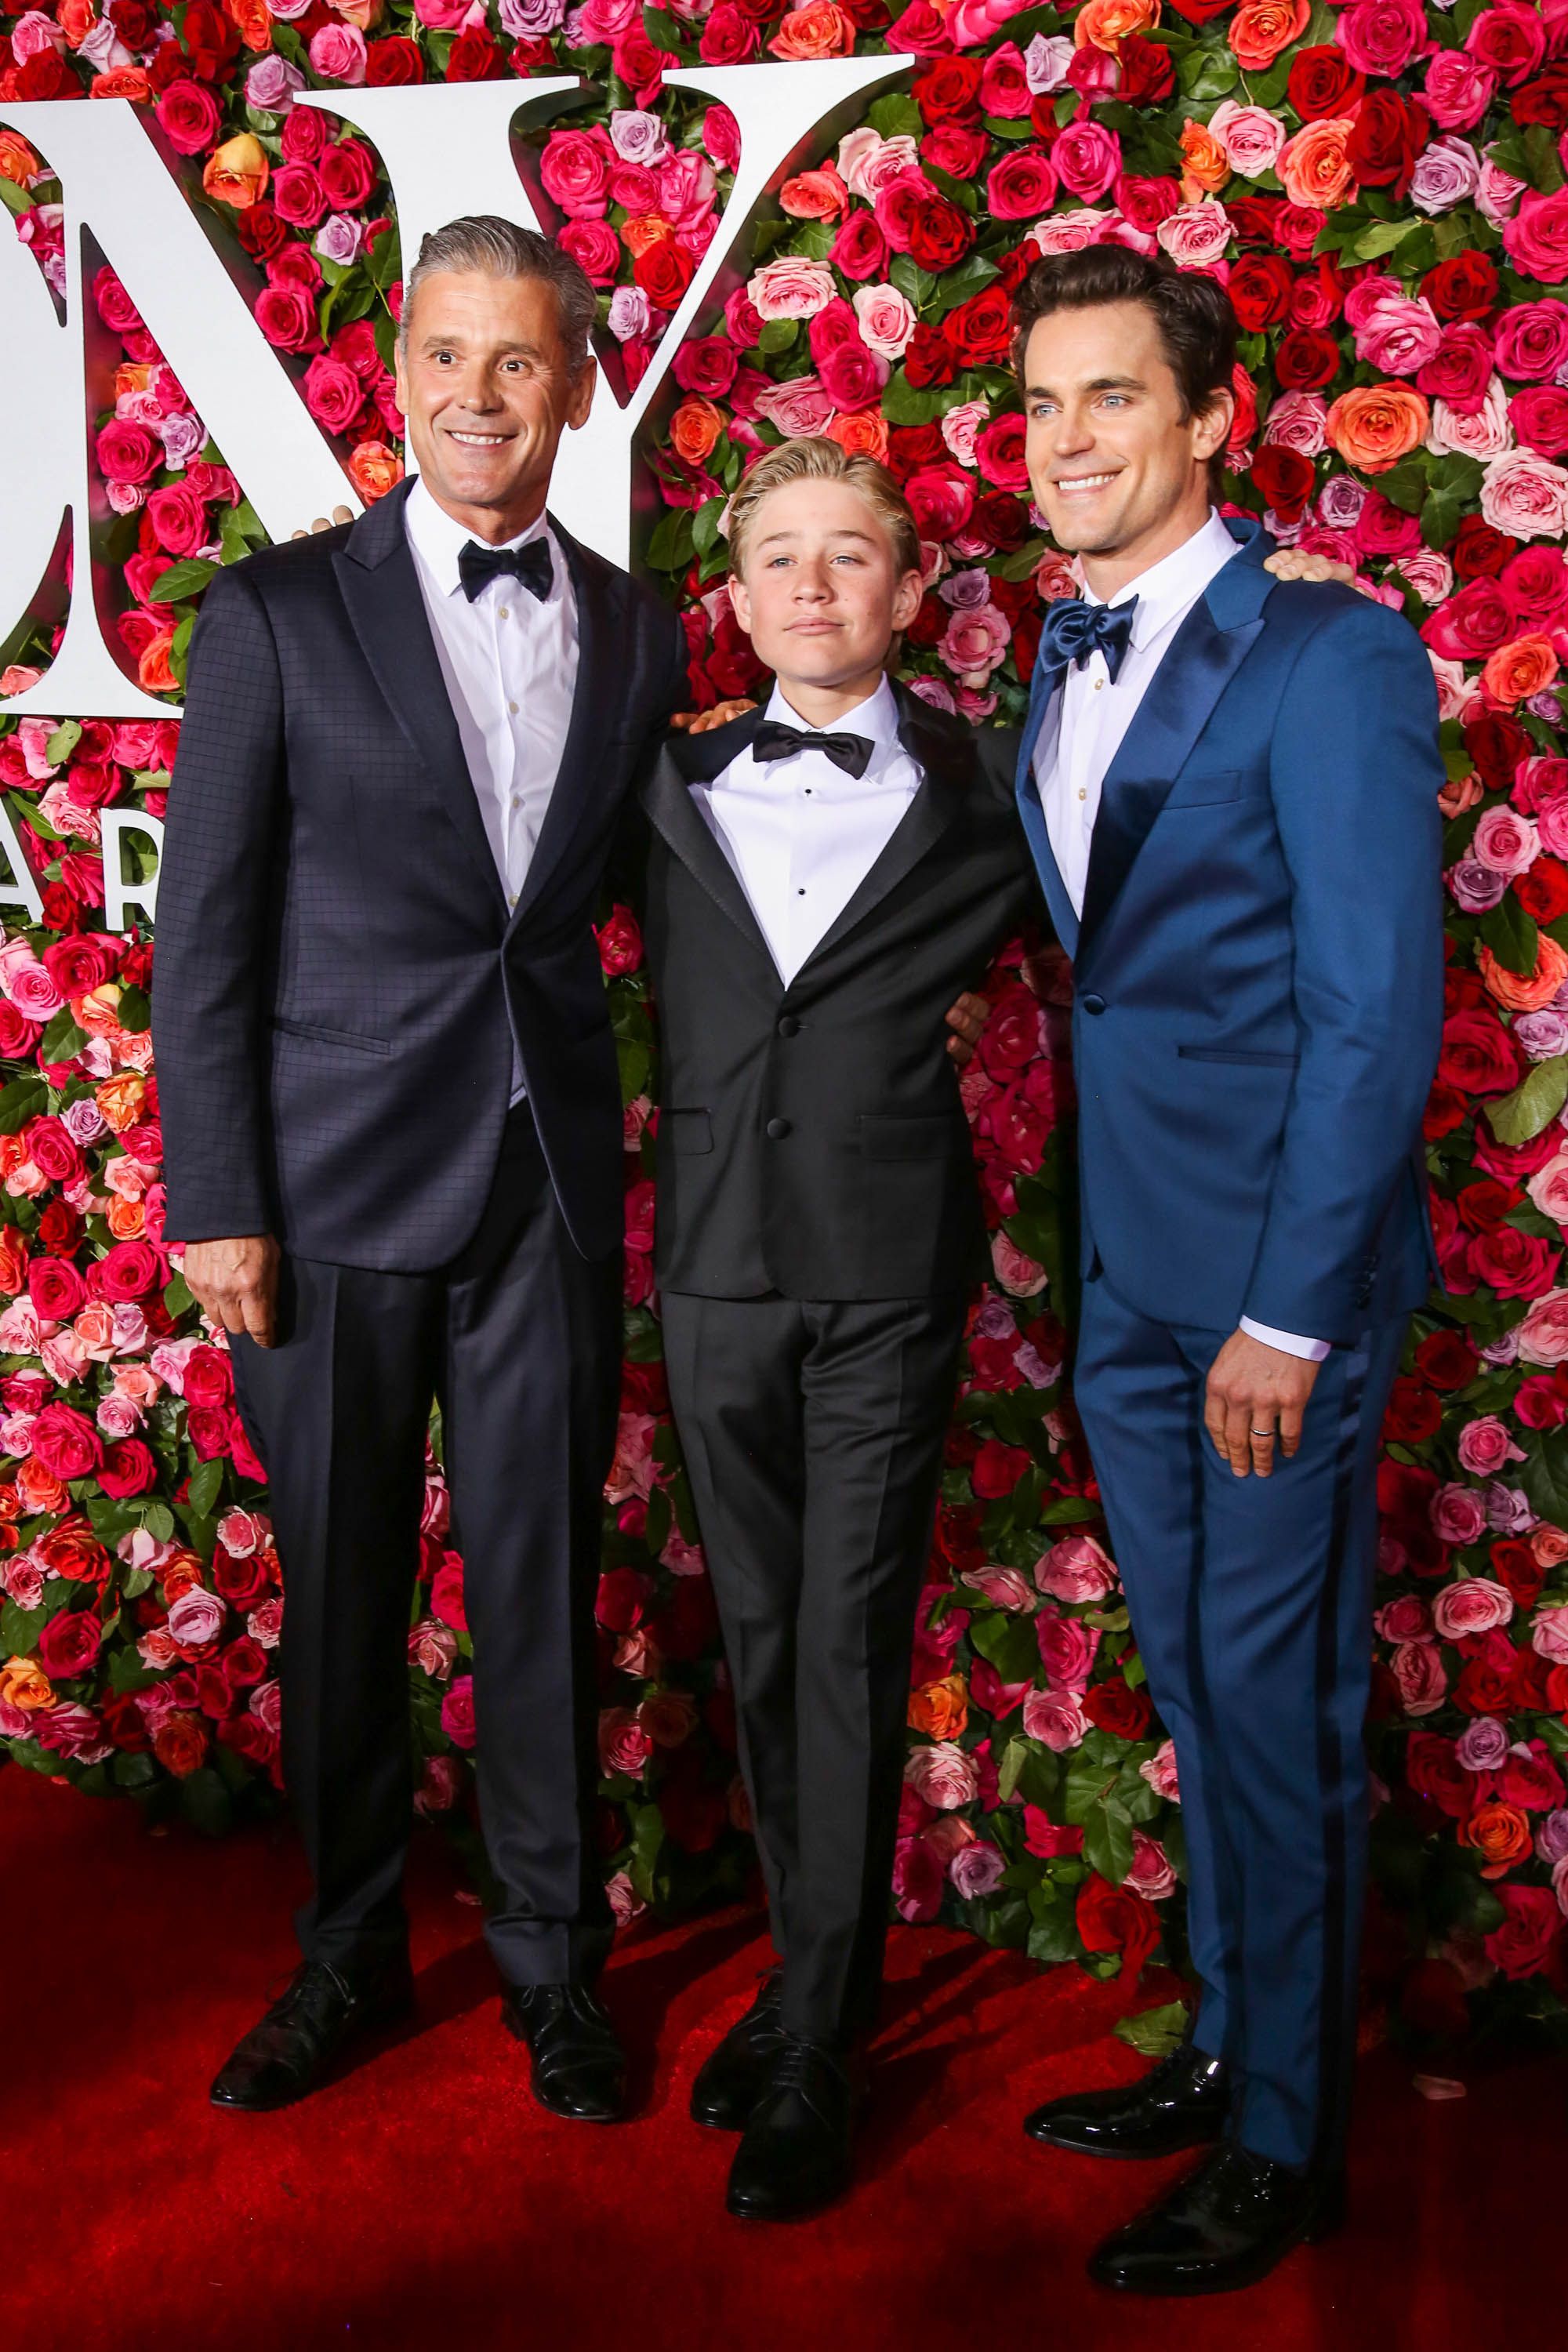  Simon Halls, Kit Halls and Matt Bomer during the 72nd Annual Tony Awards at Radio City Music Hall on June 10, 2018, in New York City. | Source: Getty Images